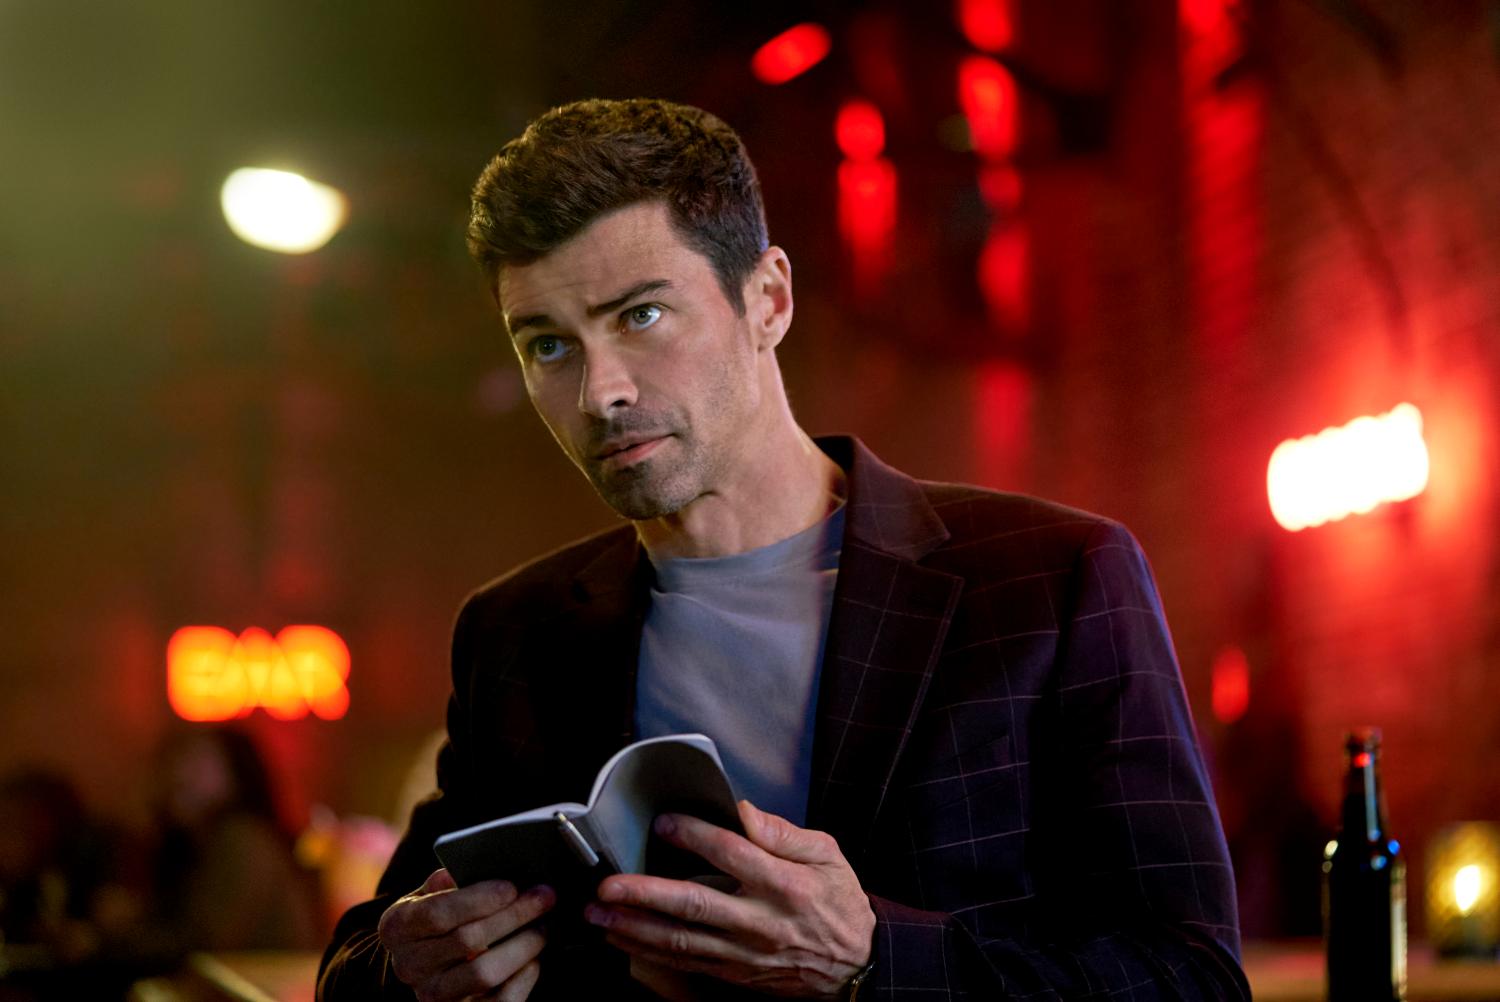 Matt Cohen spoke about his role in Made for Each Other on Hallmark Channel